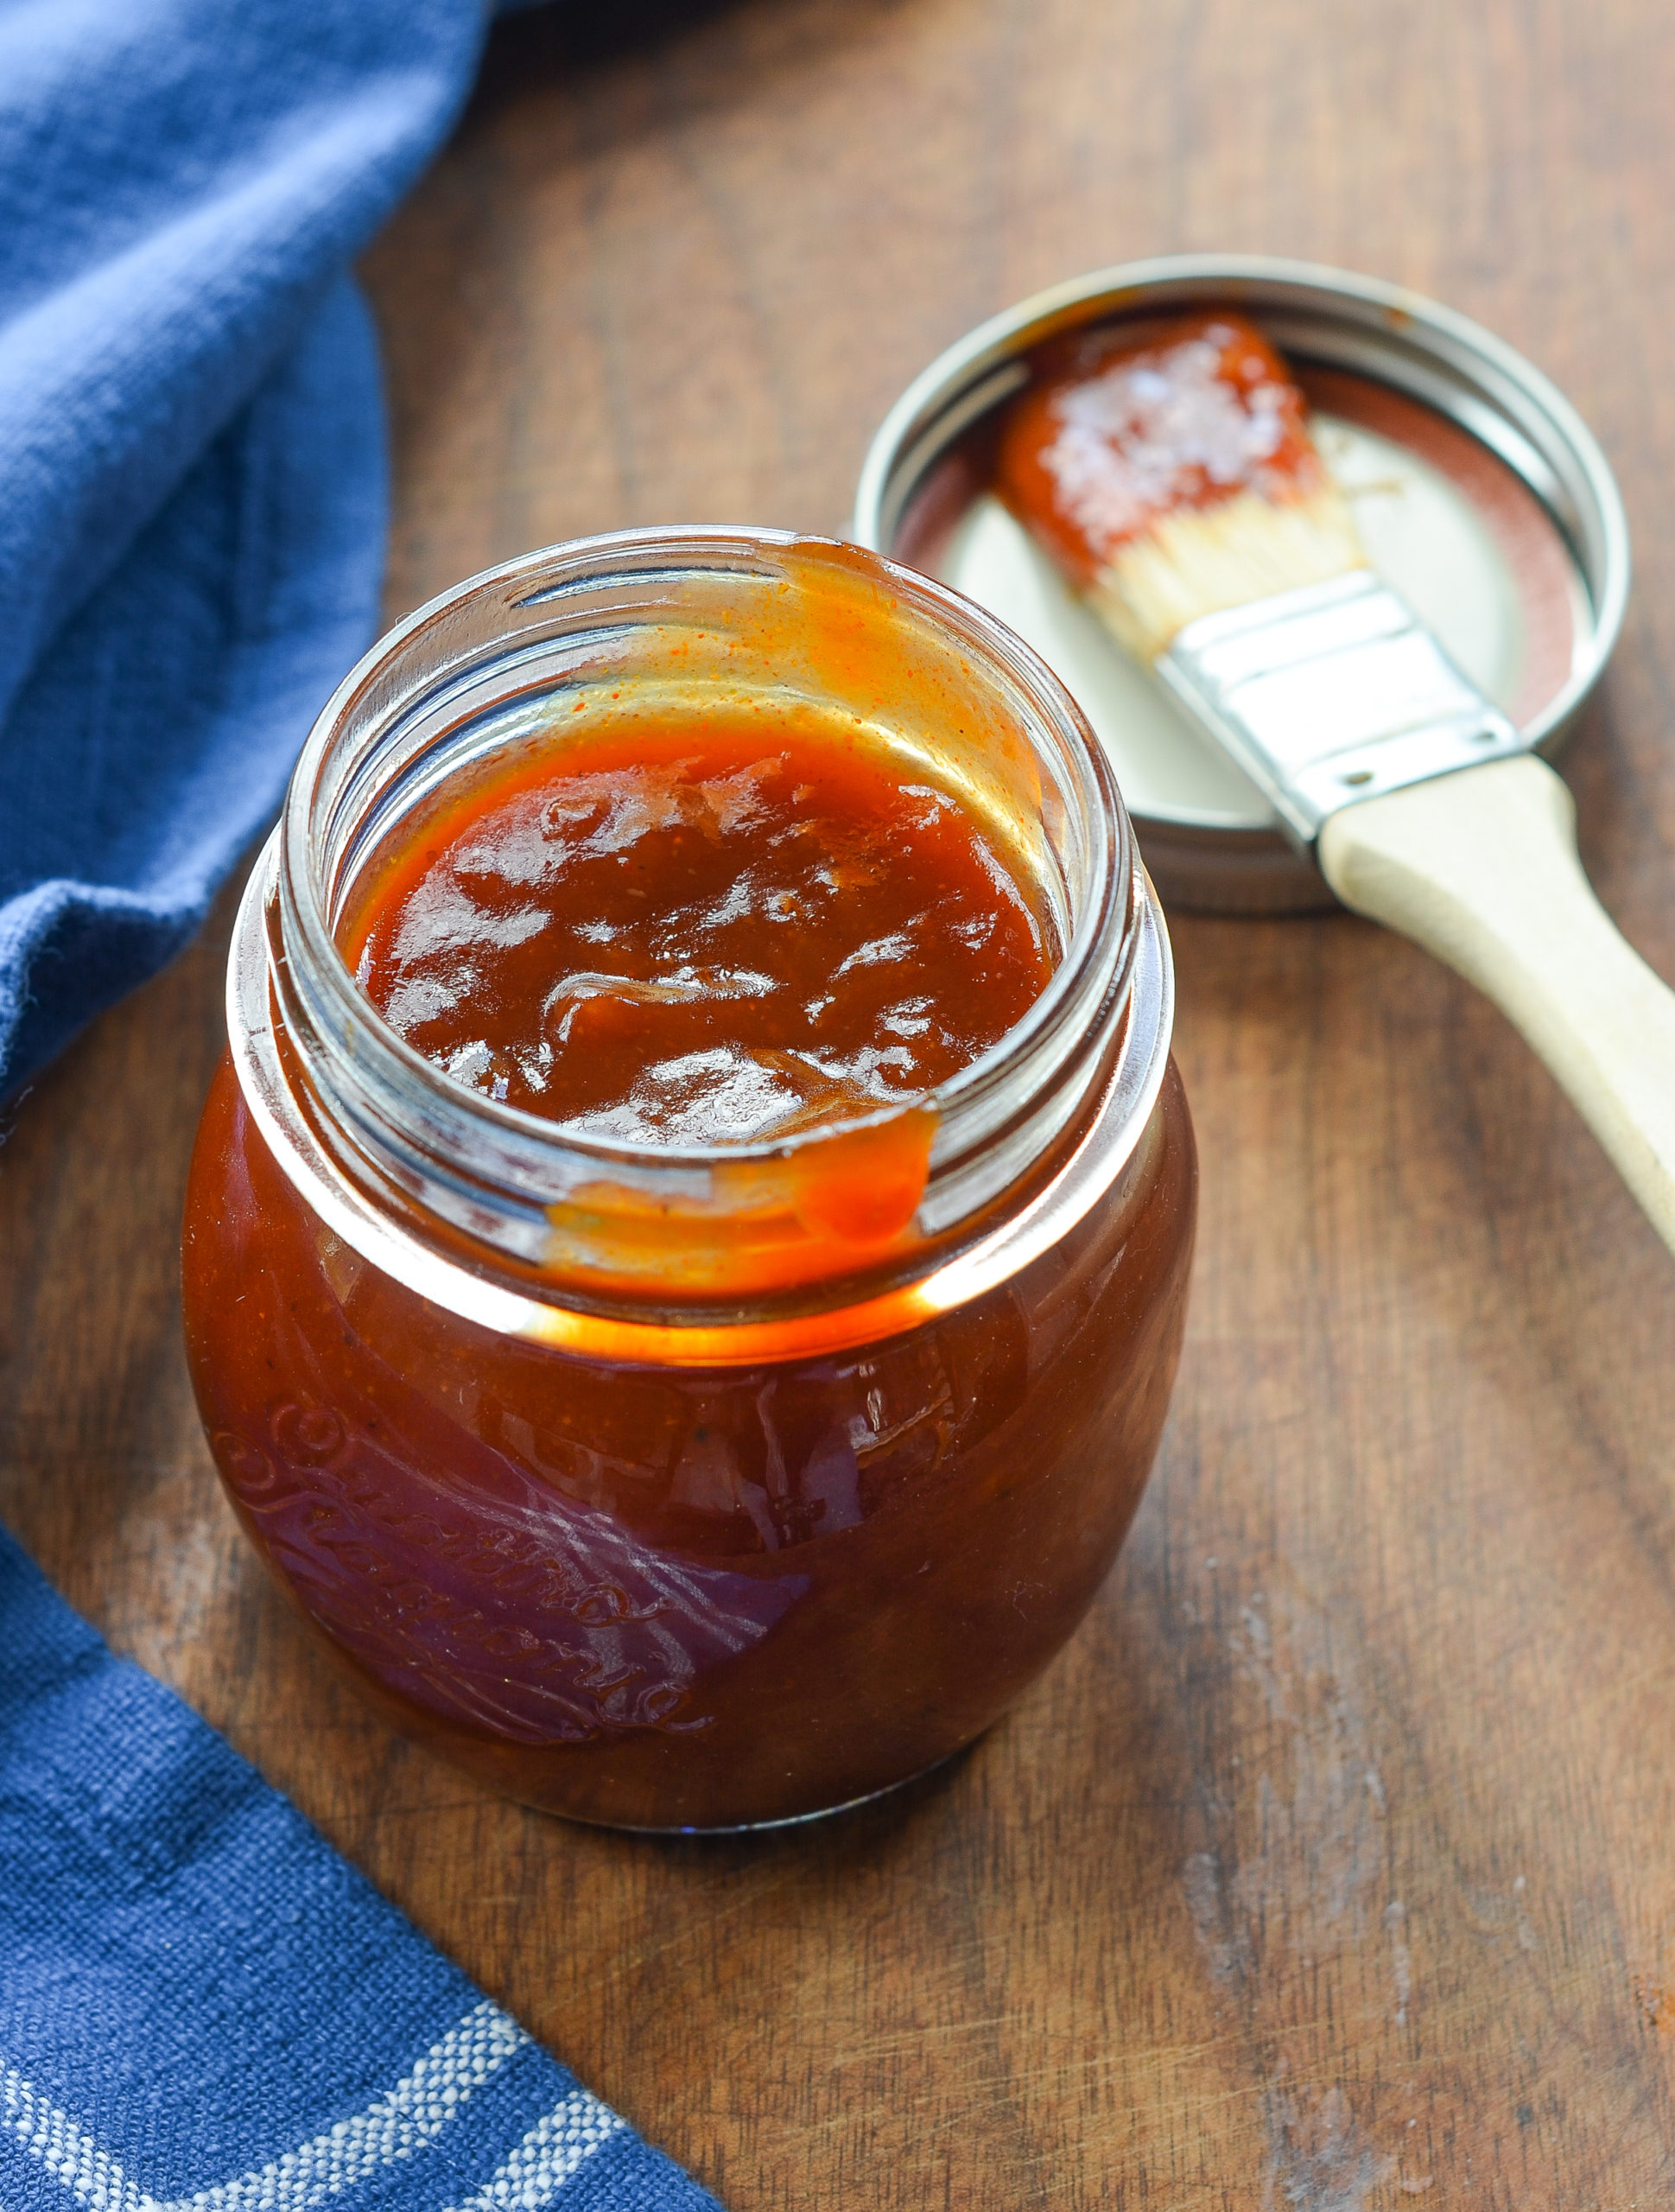 Homemade Barbecue Sauce Recipes Add Fresh Flavor To Your Smoky Meats ...